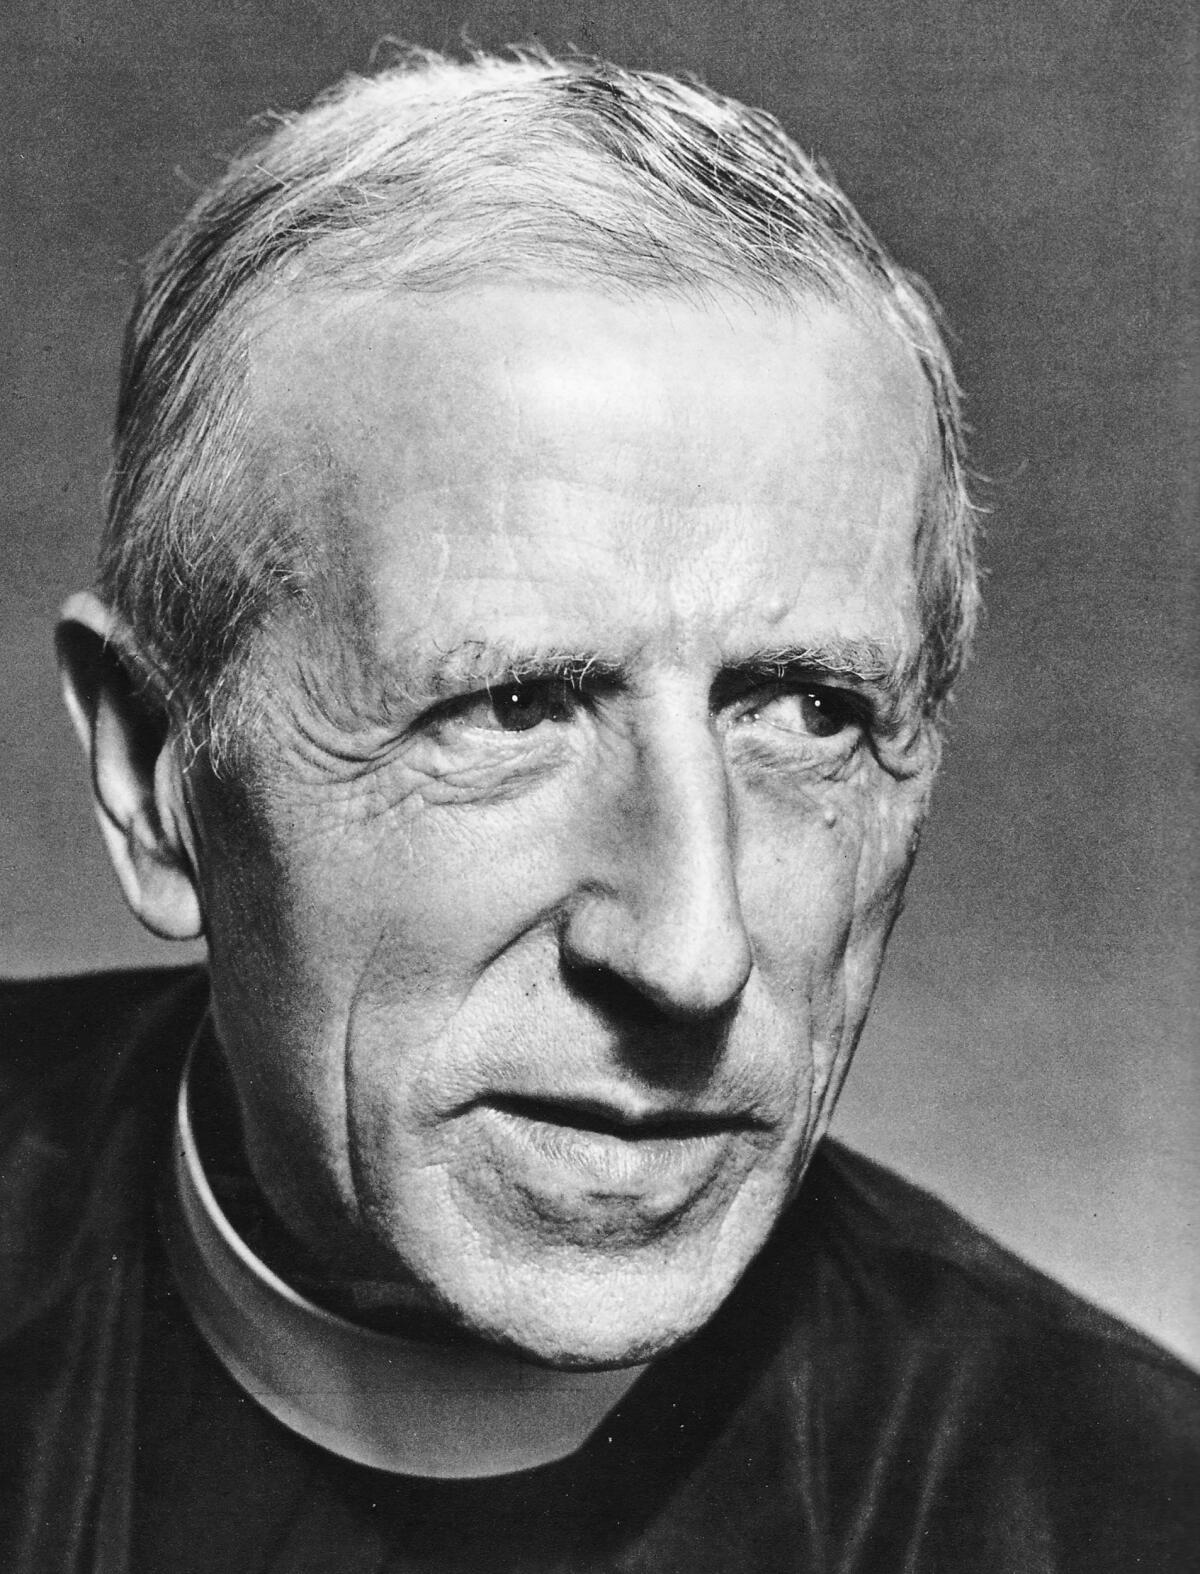 Father Pierre Tielhard de Chardin, a stern-looking priest in a black and white photo.